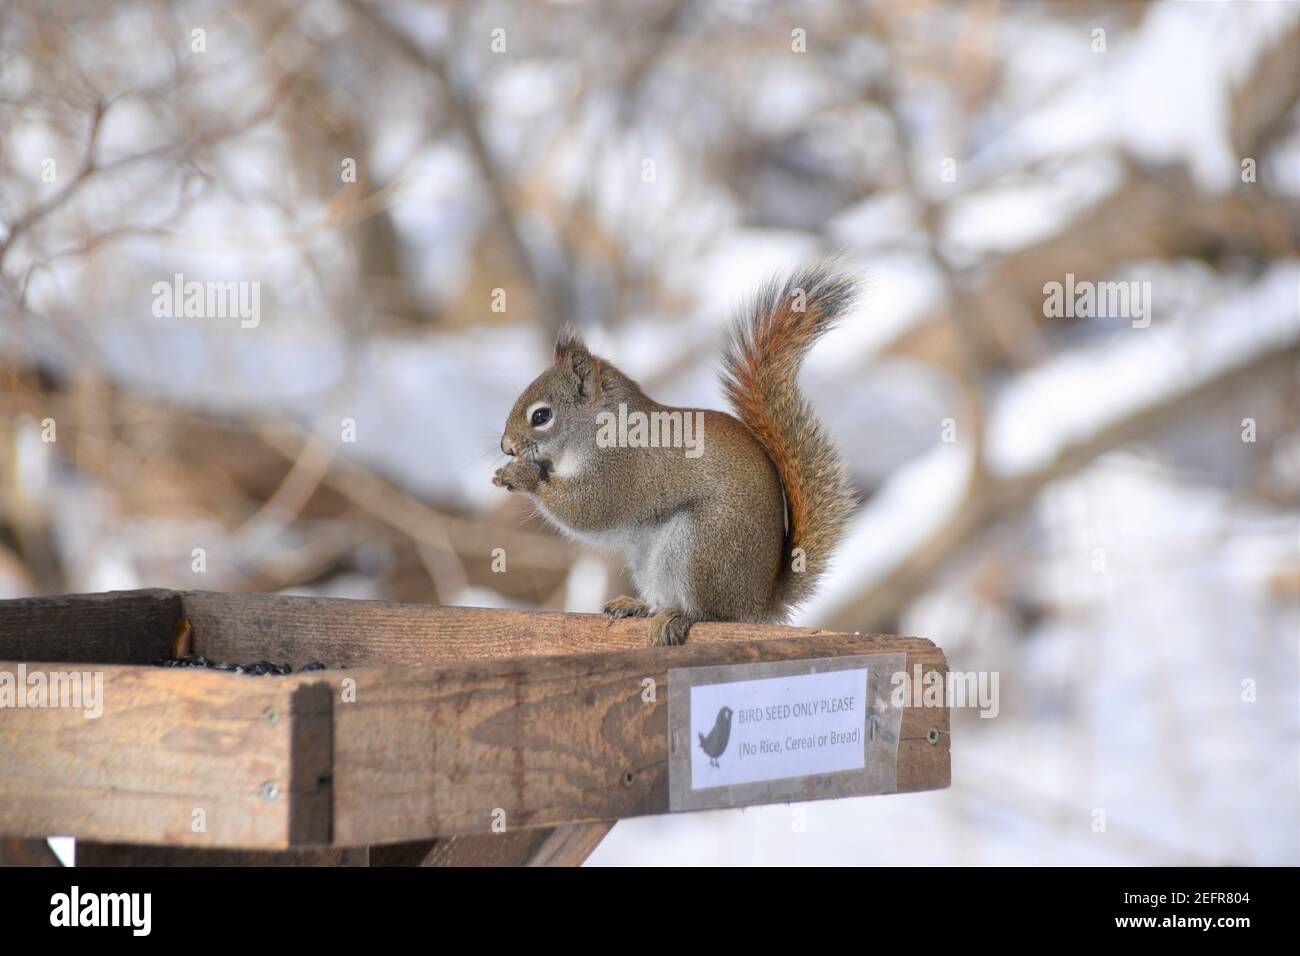 A squirrel out for a morning seed snack Stock Photo